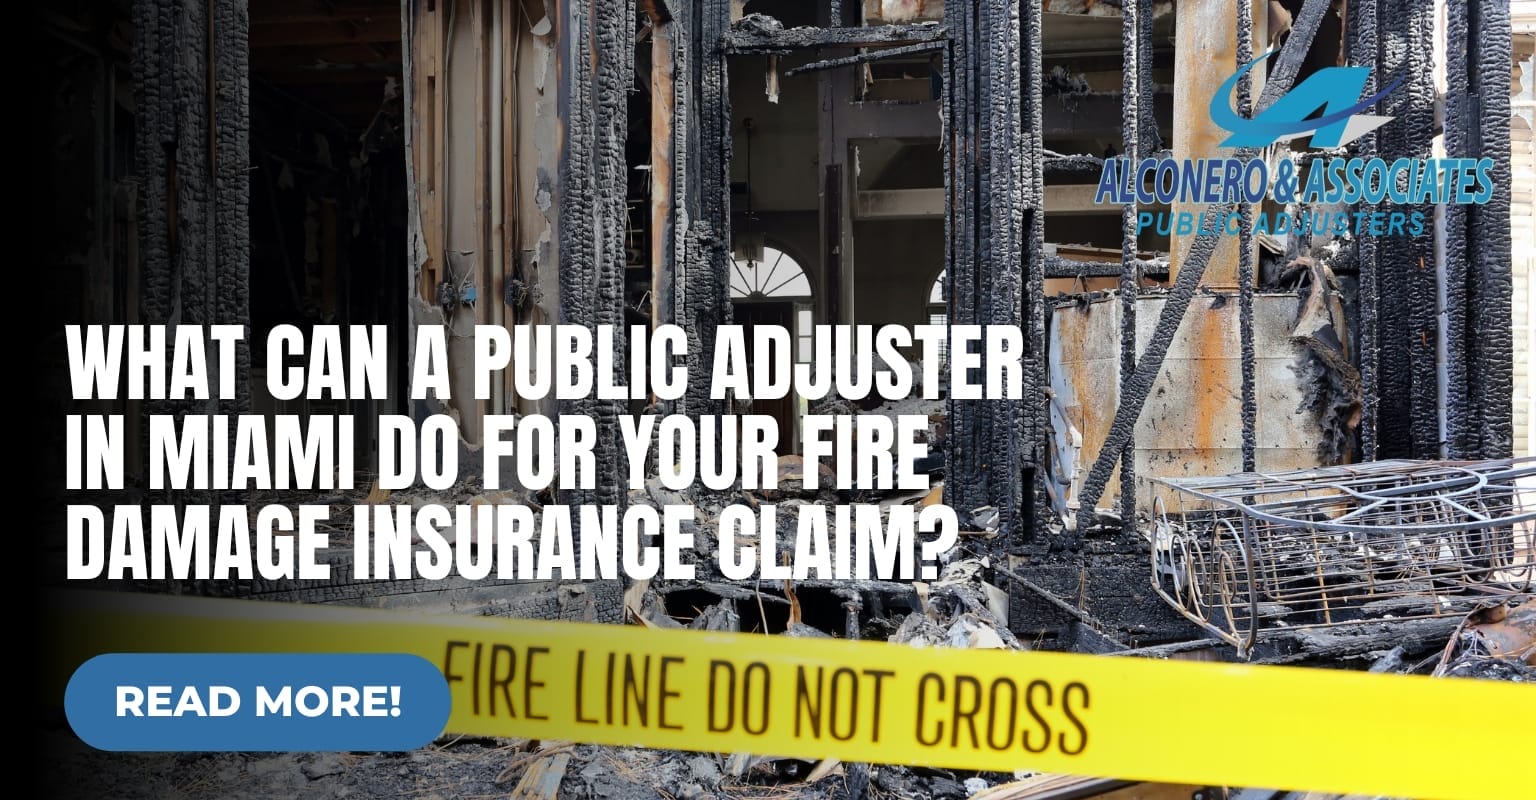 What Can a Public Adjuster in Miami Do for Your Fire Damage Insurance Claim?